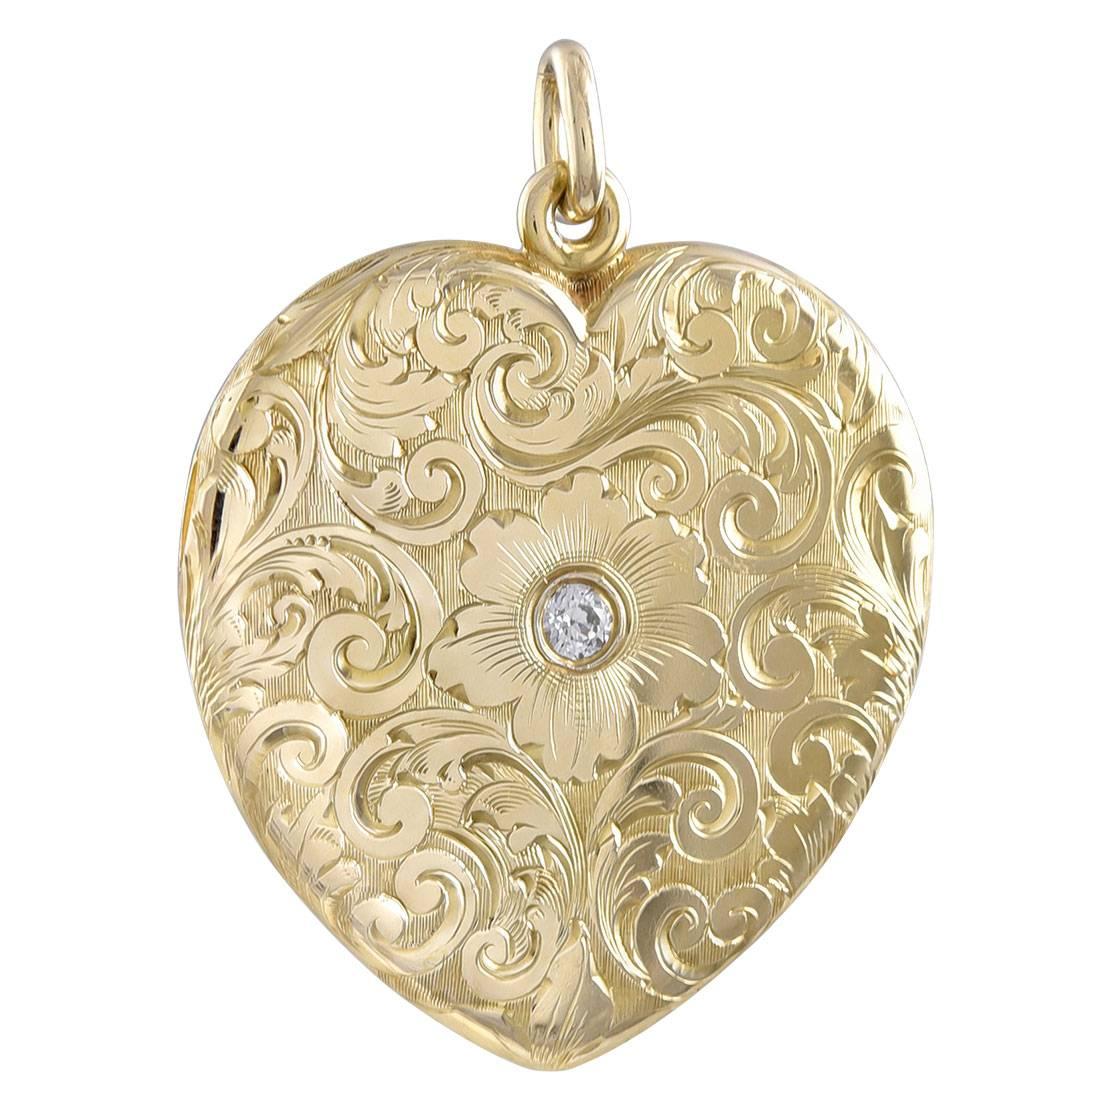 Absolutely Beautiful Antique Gold Heart Locket For Sale